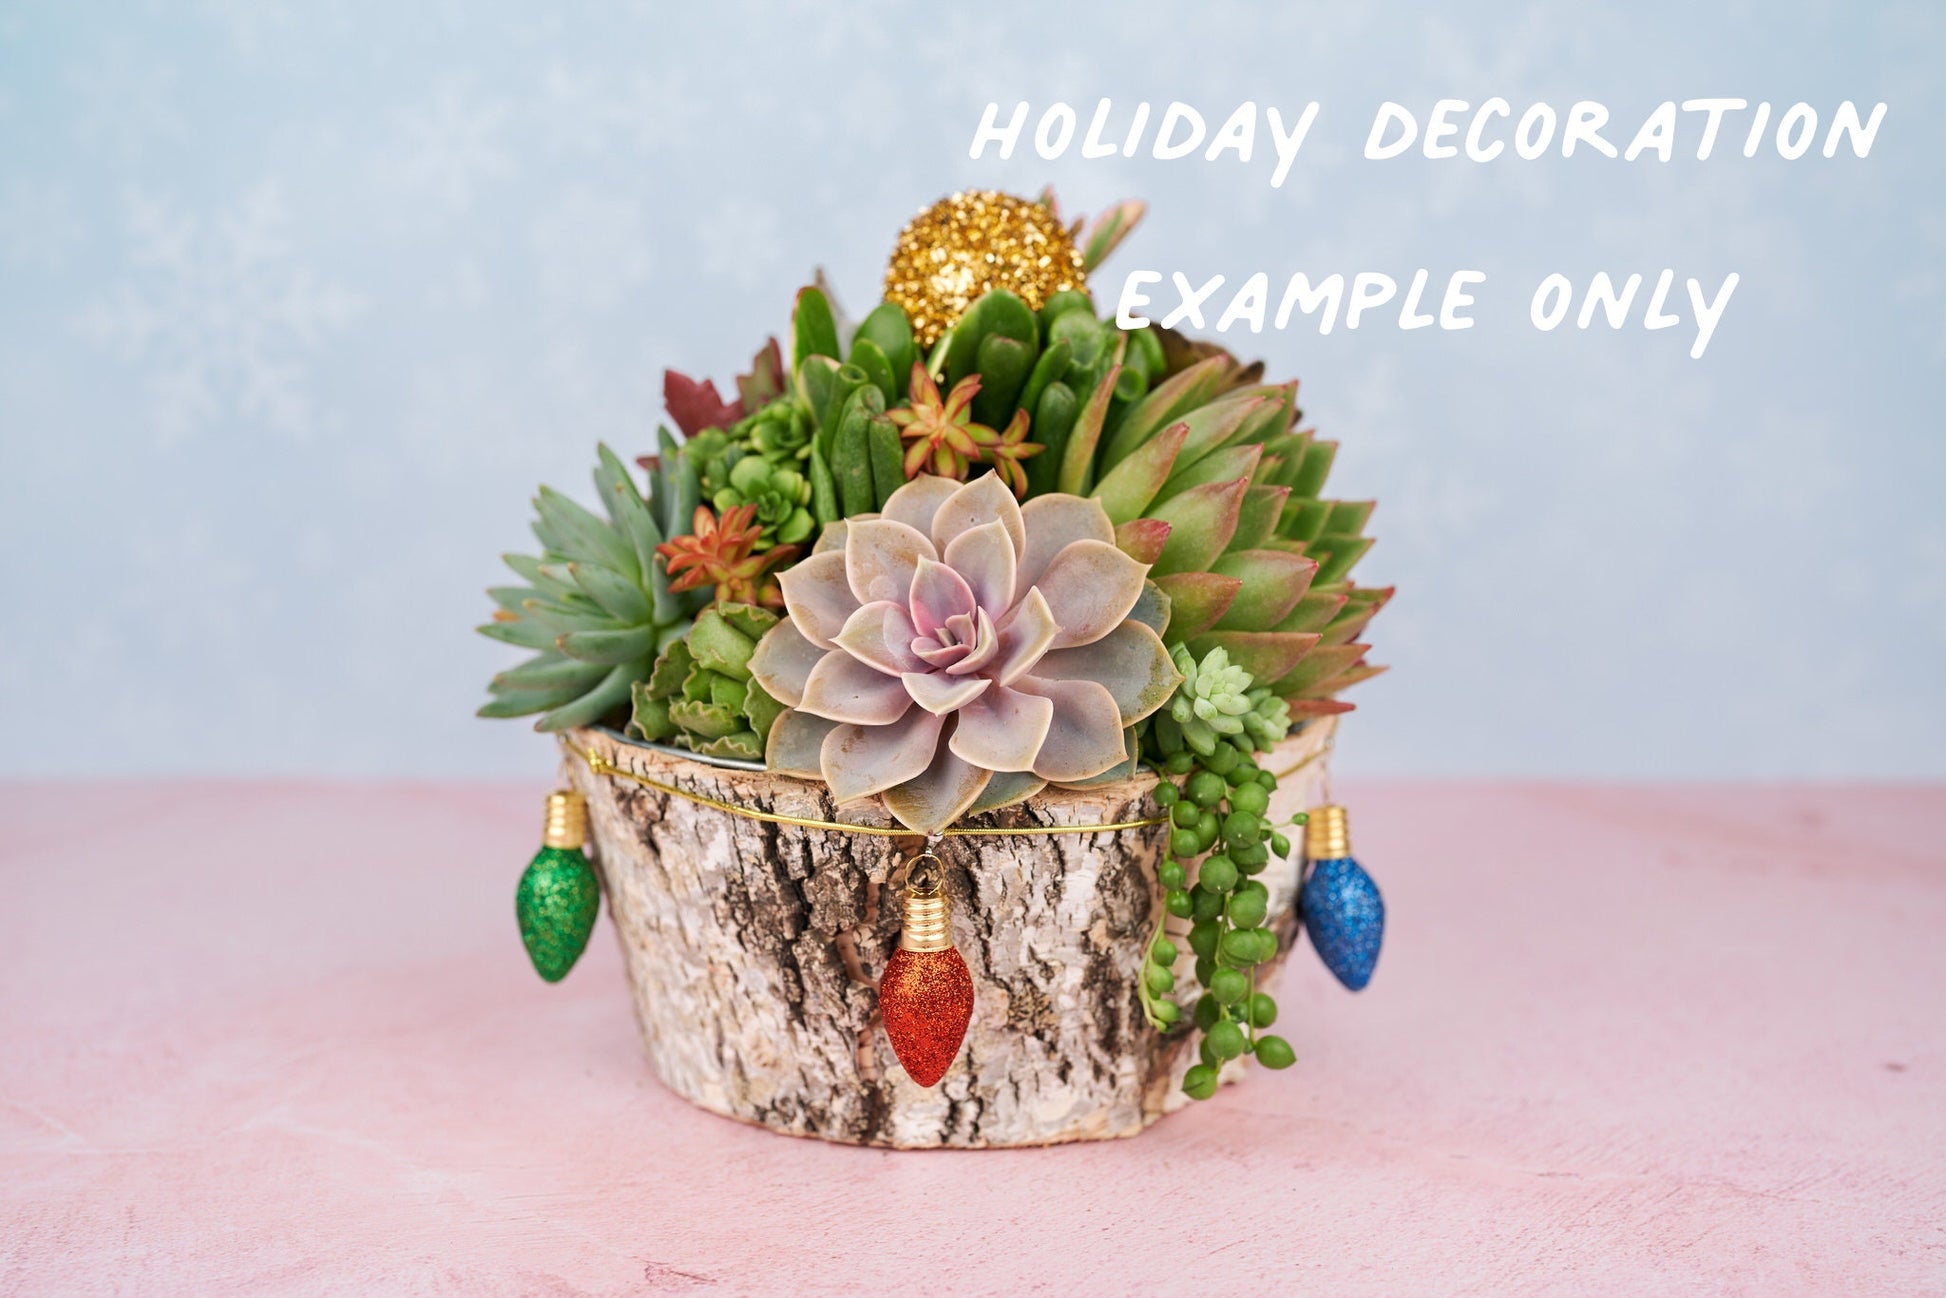 Christmas-Holiday Decoration Add-on | Add Winter Holiday Festive Decor to any Succulent Arrangement: DESIGNERS CHOICE!